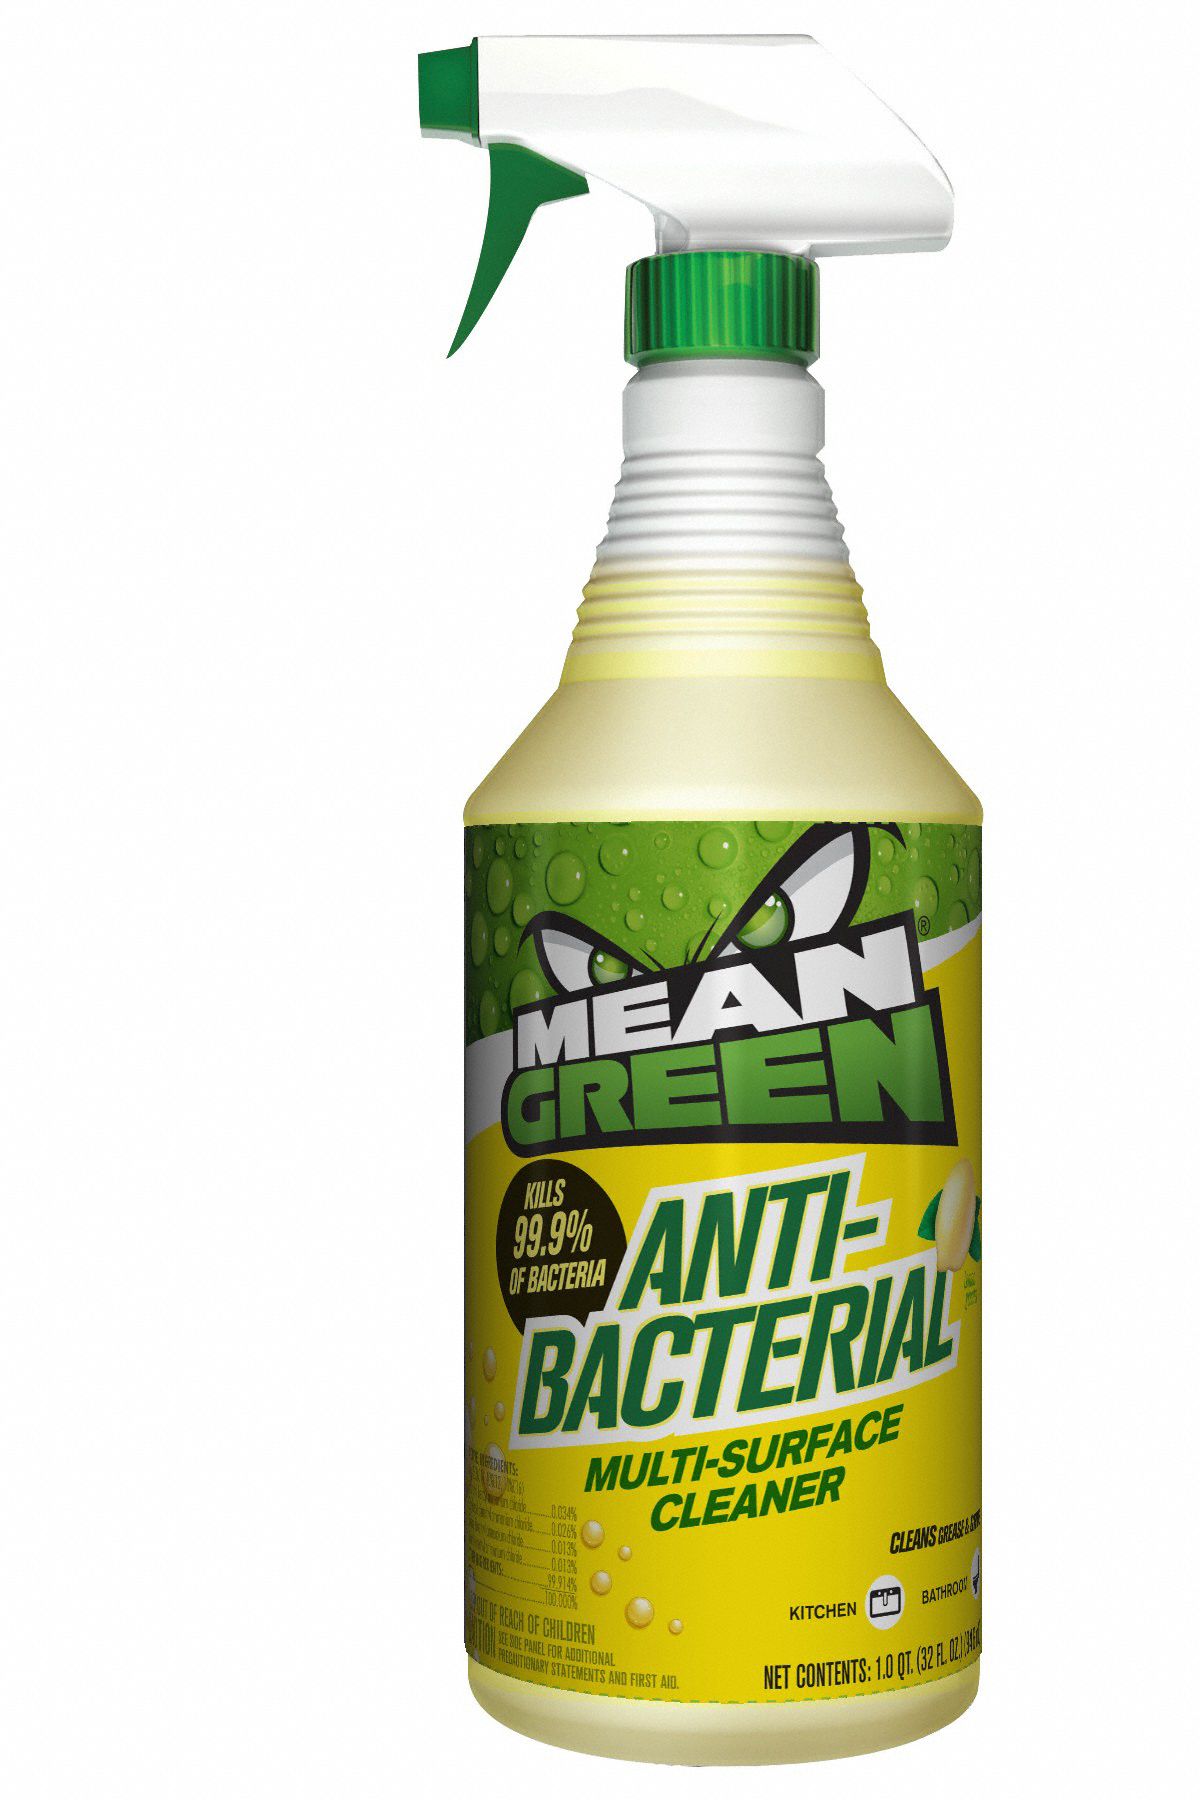 Anti-Bacterial Cleaner: Trigger Spray Bottle, 32 oz Container Size, Ready to Use, Liquid